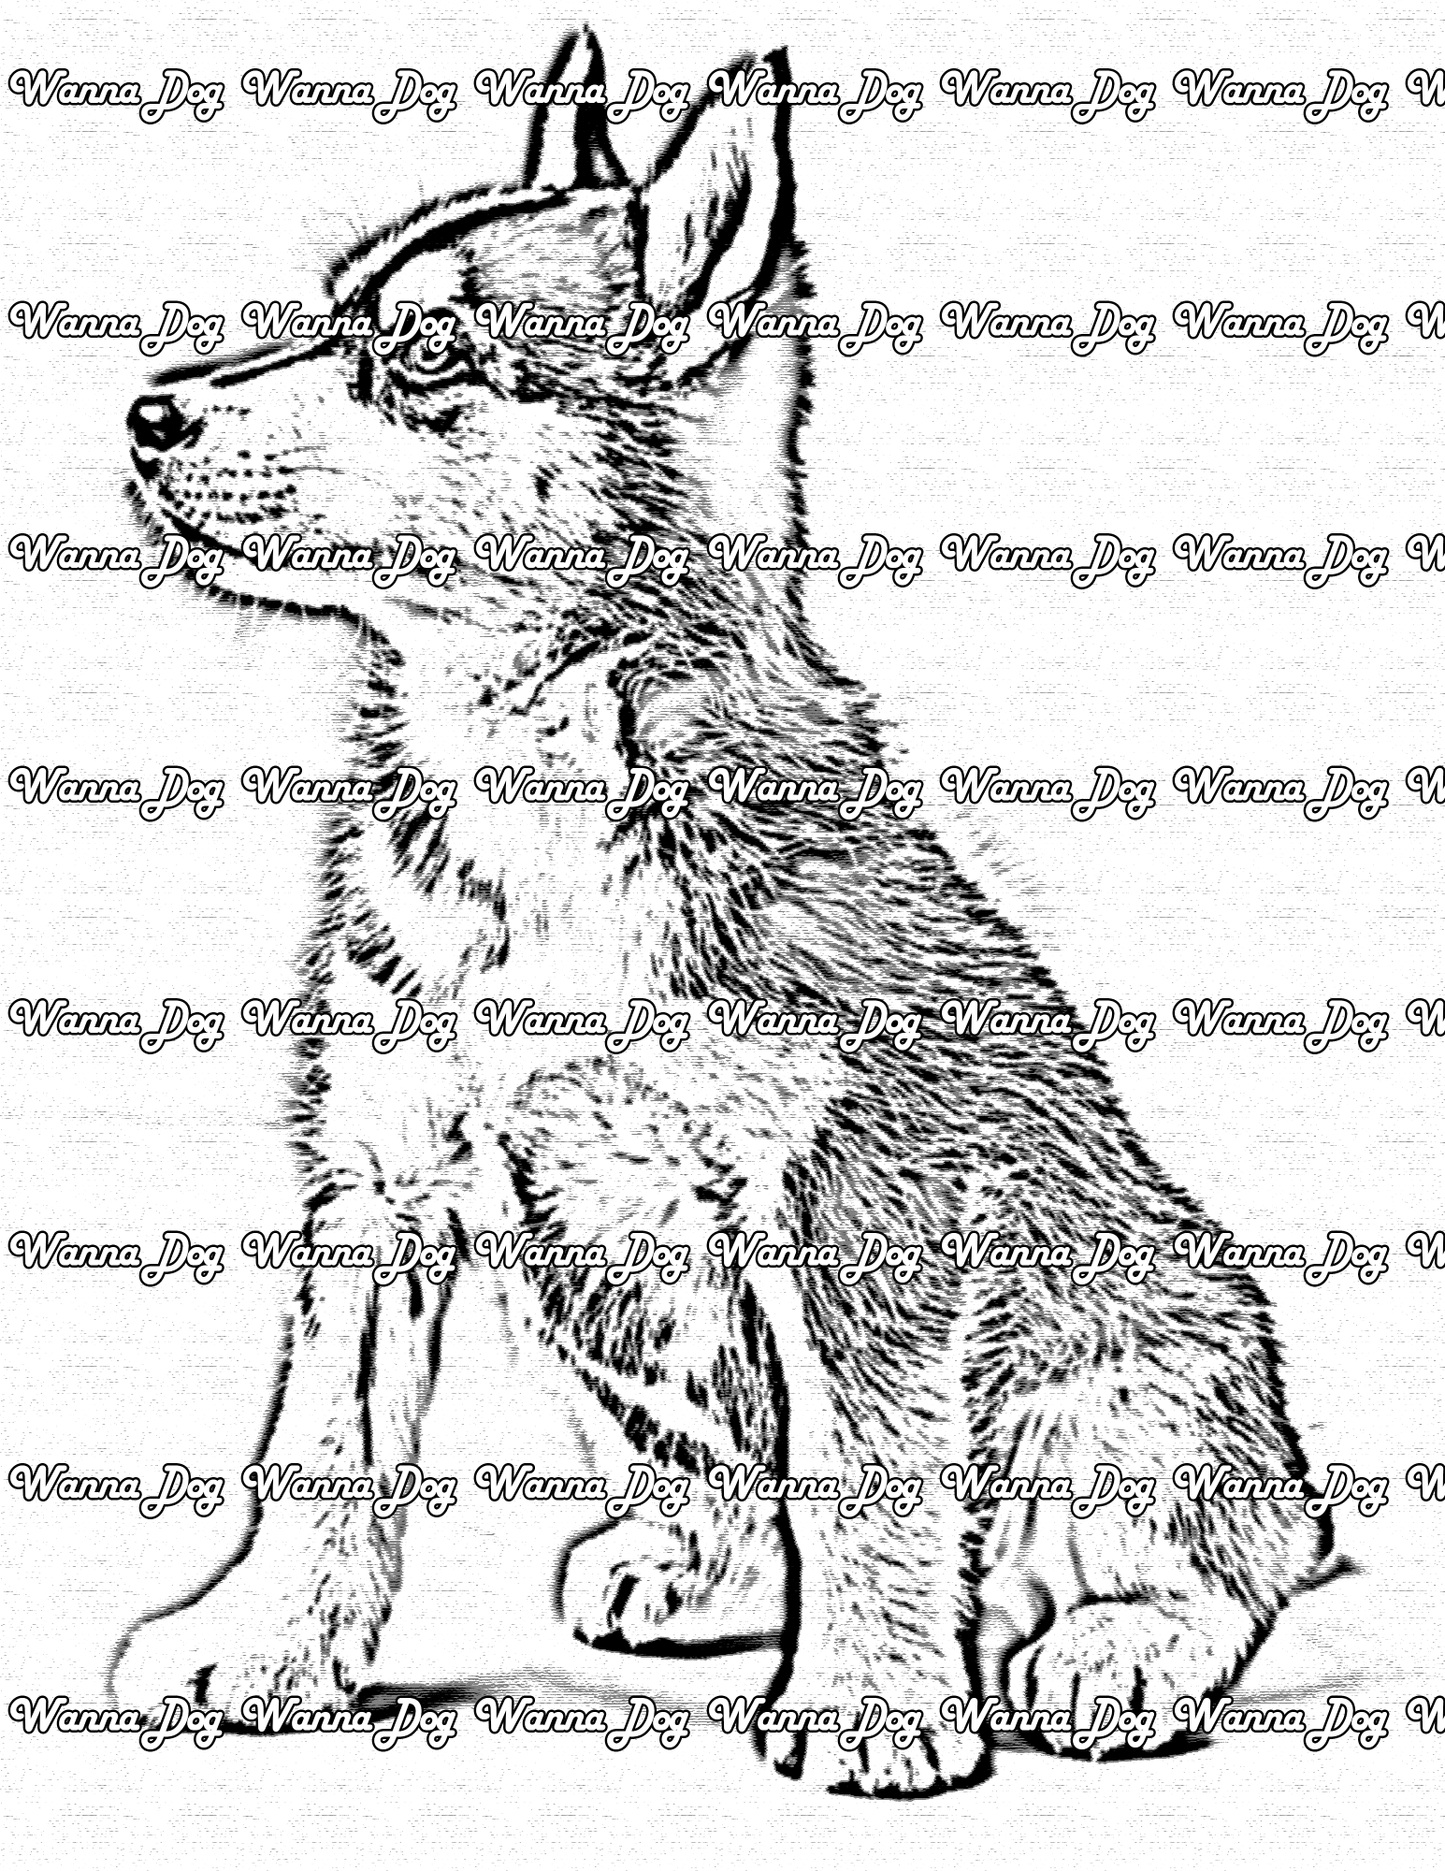 Husky Puppy Coloring Page of a Husky Puppy sitting and looking away from the camera